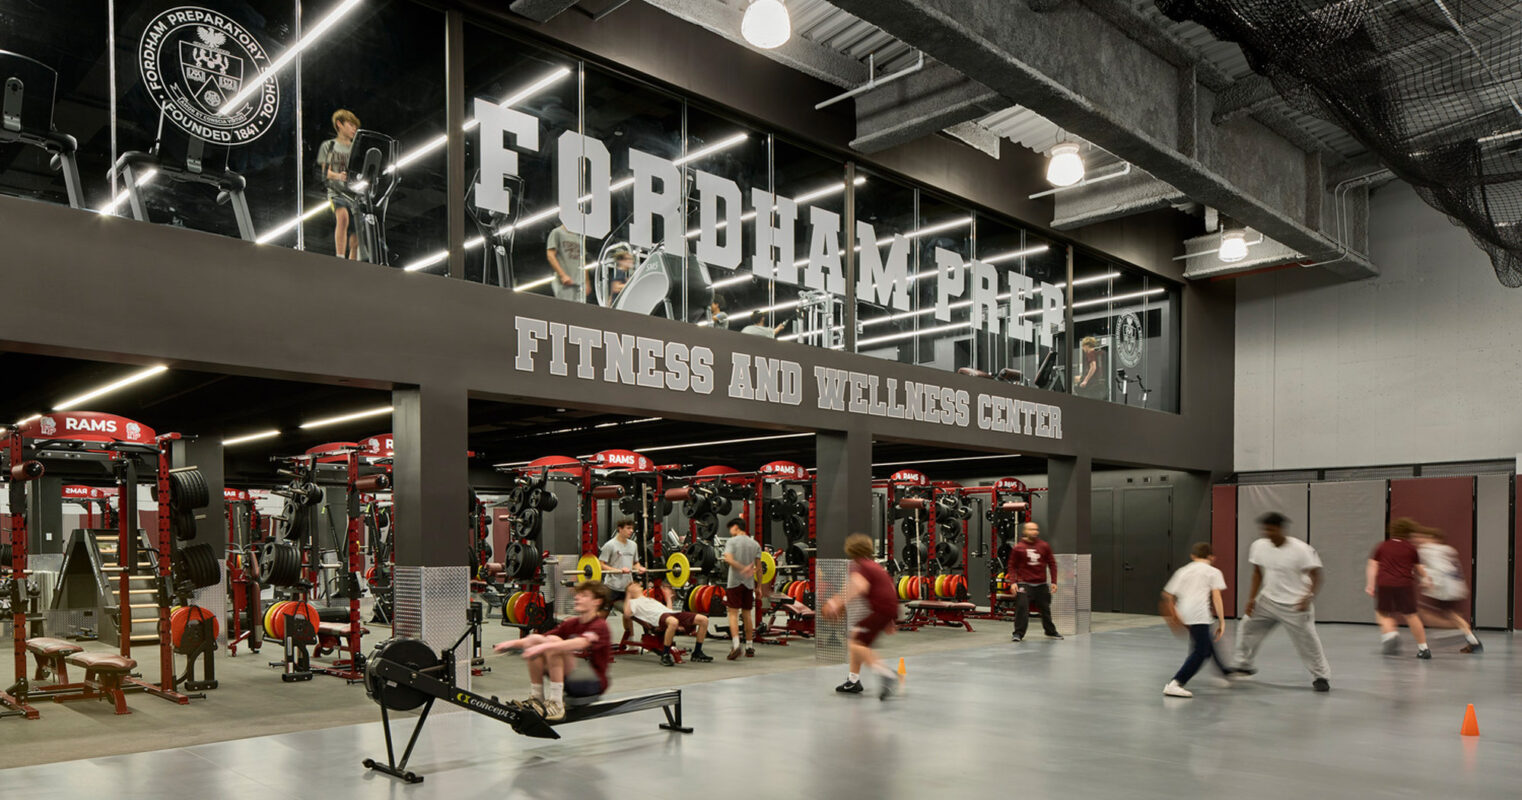 Spacious gym interior with exposed ductwork overhead, reflecting an industrial design. Mirrored walls amplify the space, featuring branded graphics for Fordham University. Red and black gym equipment are organized for functional training, promoting a vibrant, energetic atmosphere.